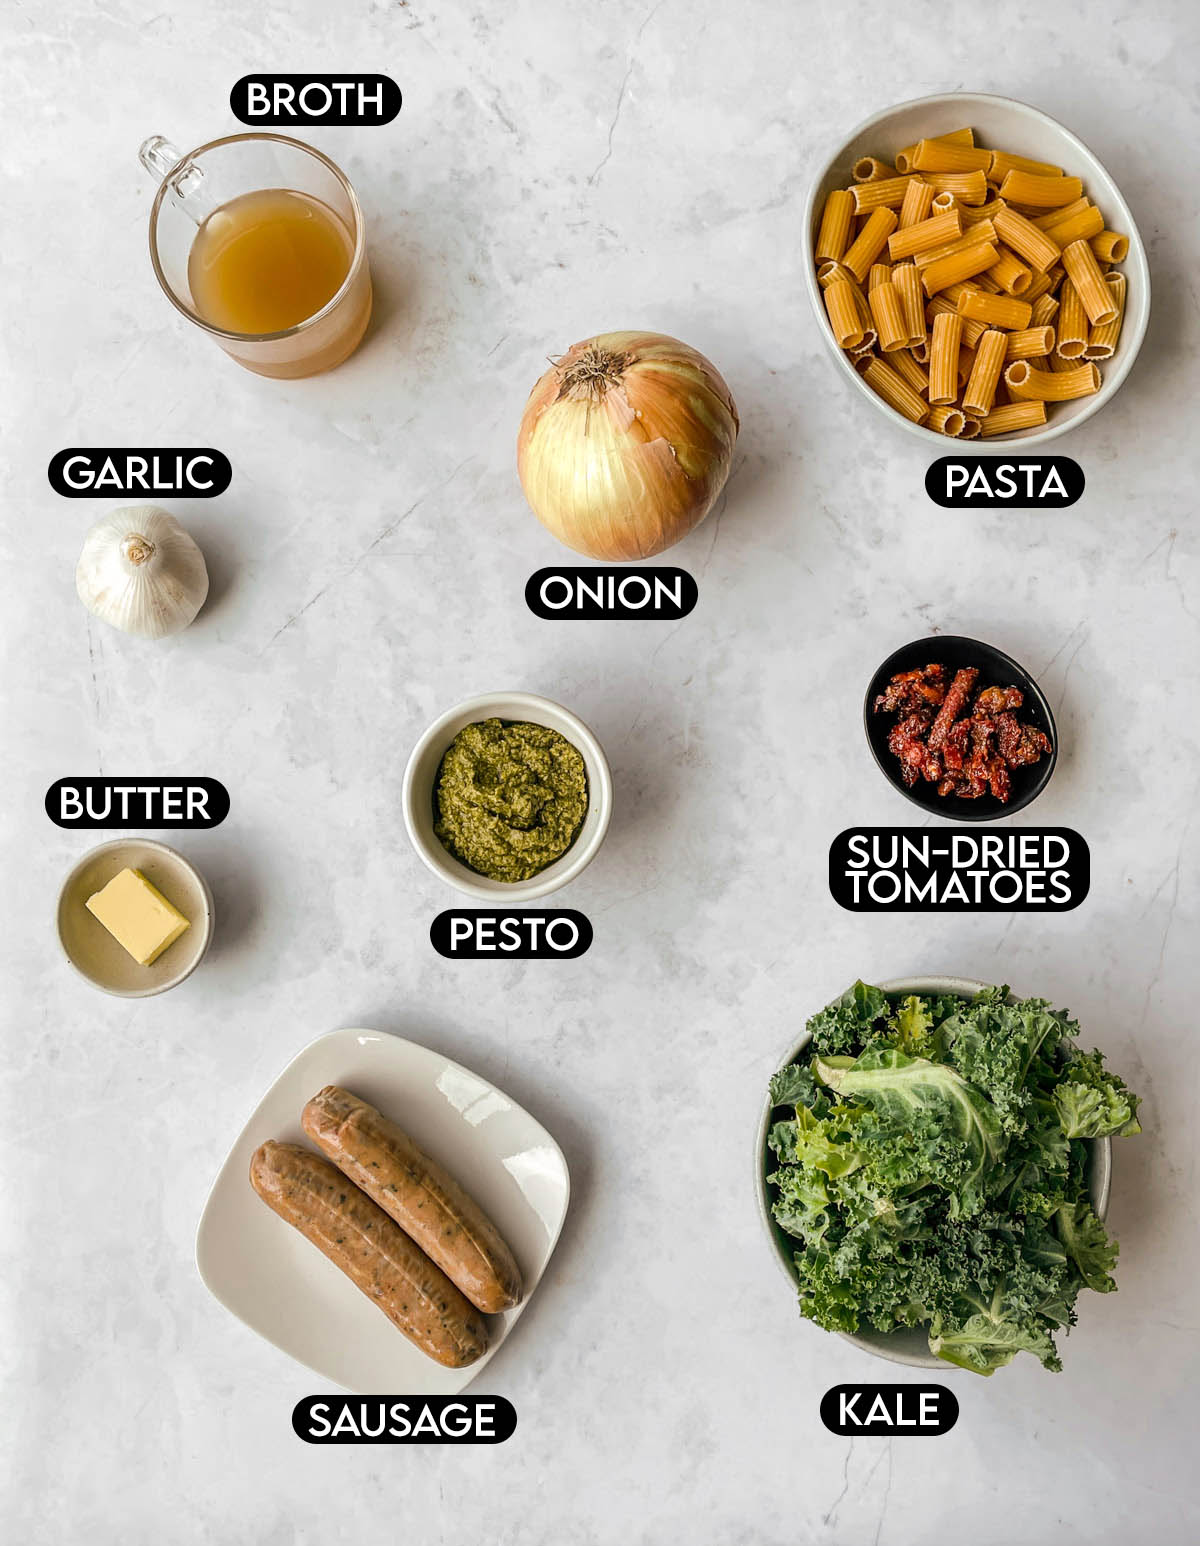 Labeled ingredients needed for sausage kale pasta: broth, garlic, onion, pasta, butter, pesto, sun-dried tomatoes, sausage, and kale.